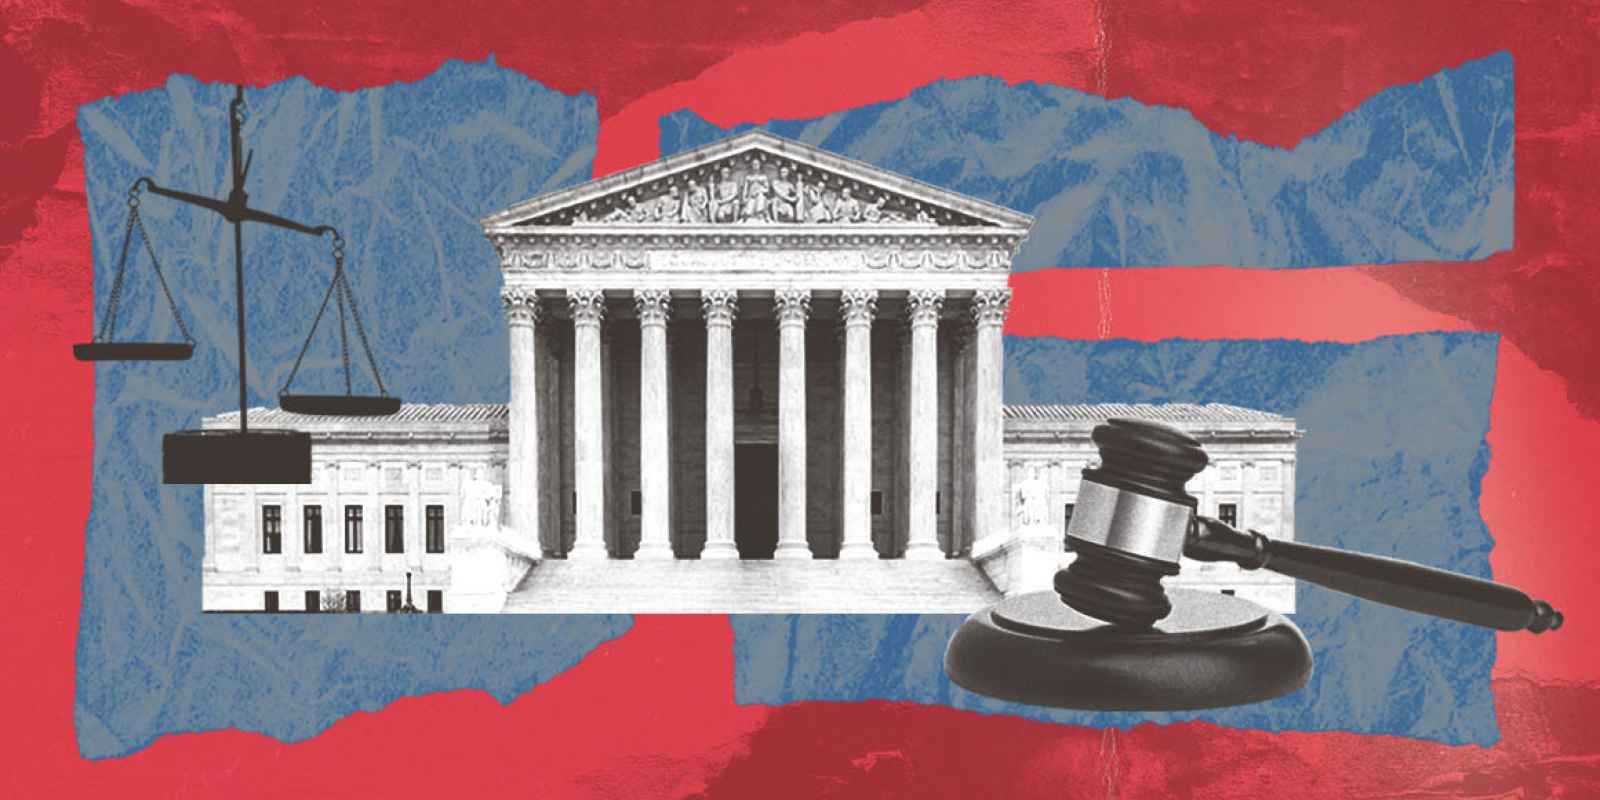 A red rectangle with blue collage-like patches. In the foreground are black and white images of a scale of justice, the US Supreme Court building, and a judge's gavel